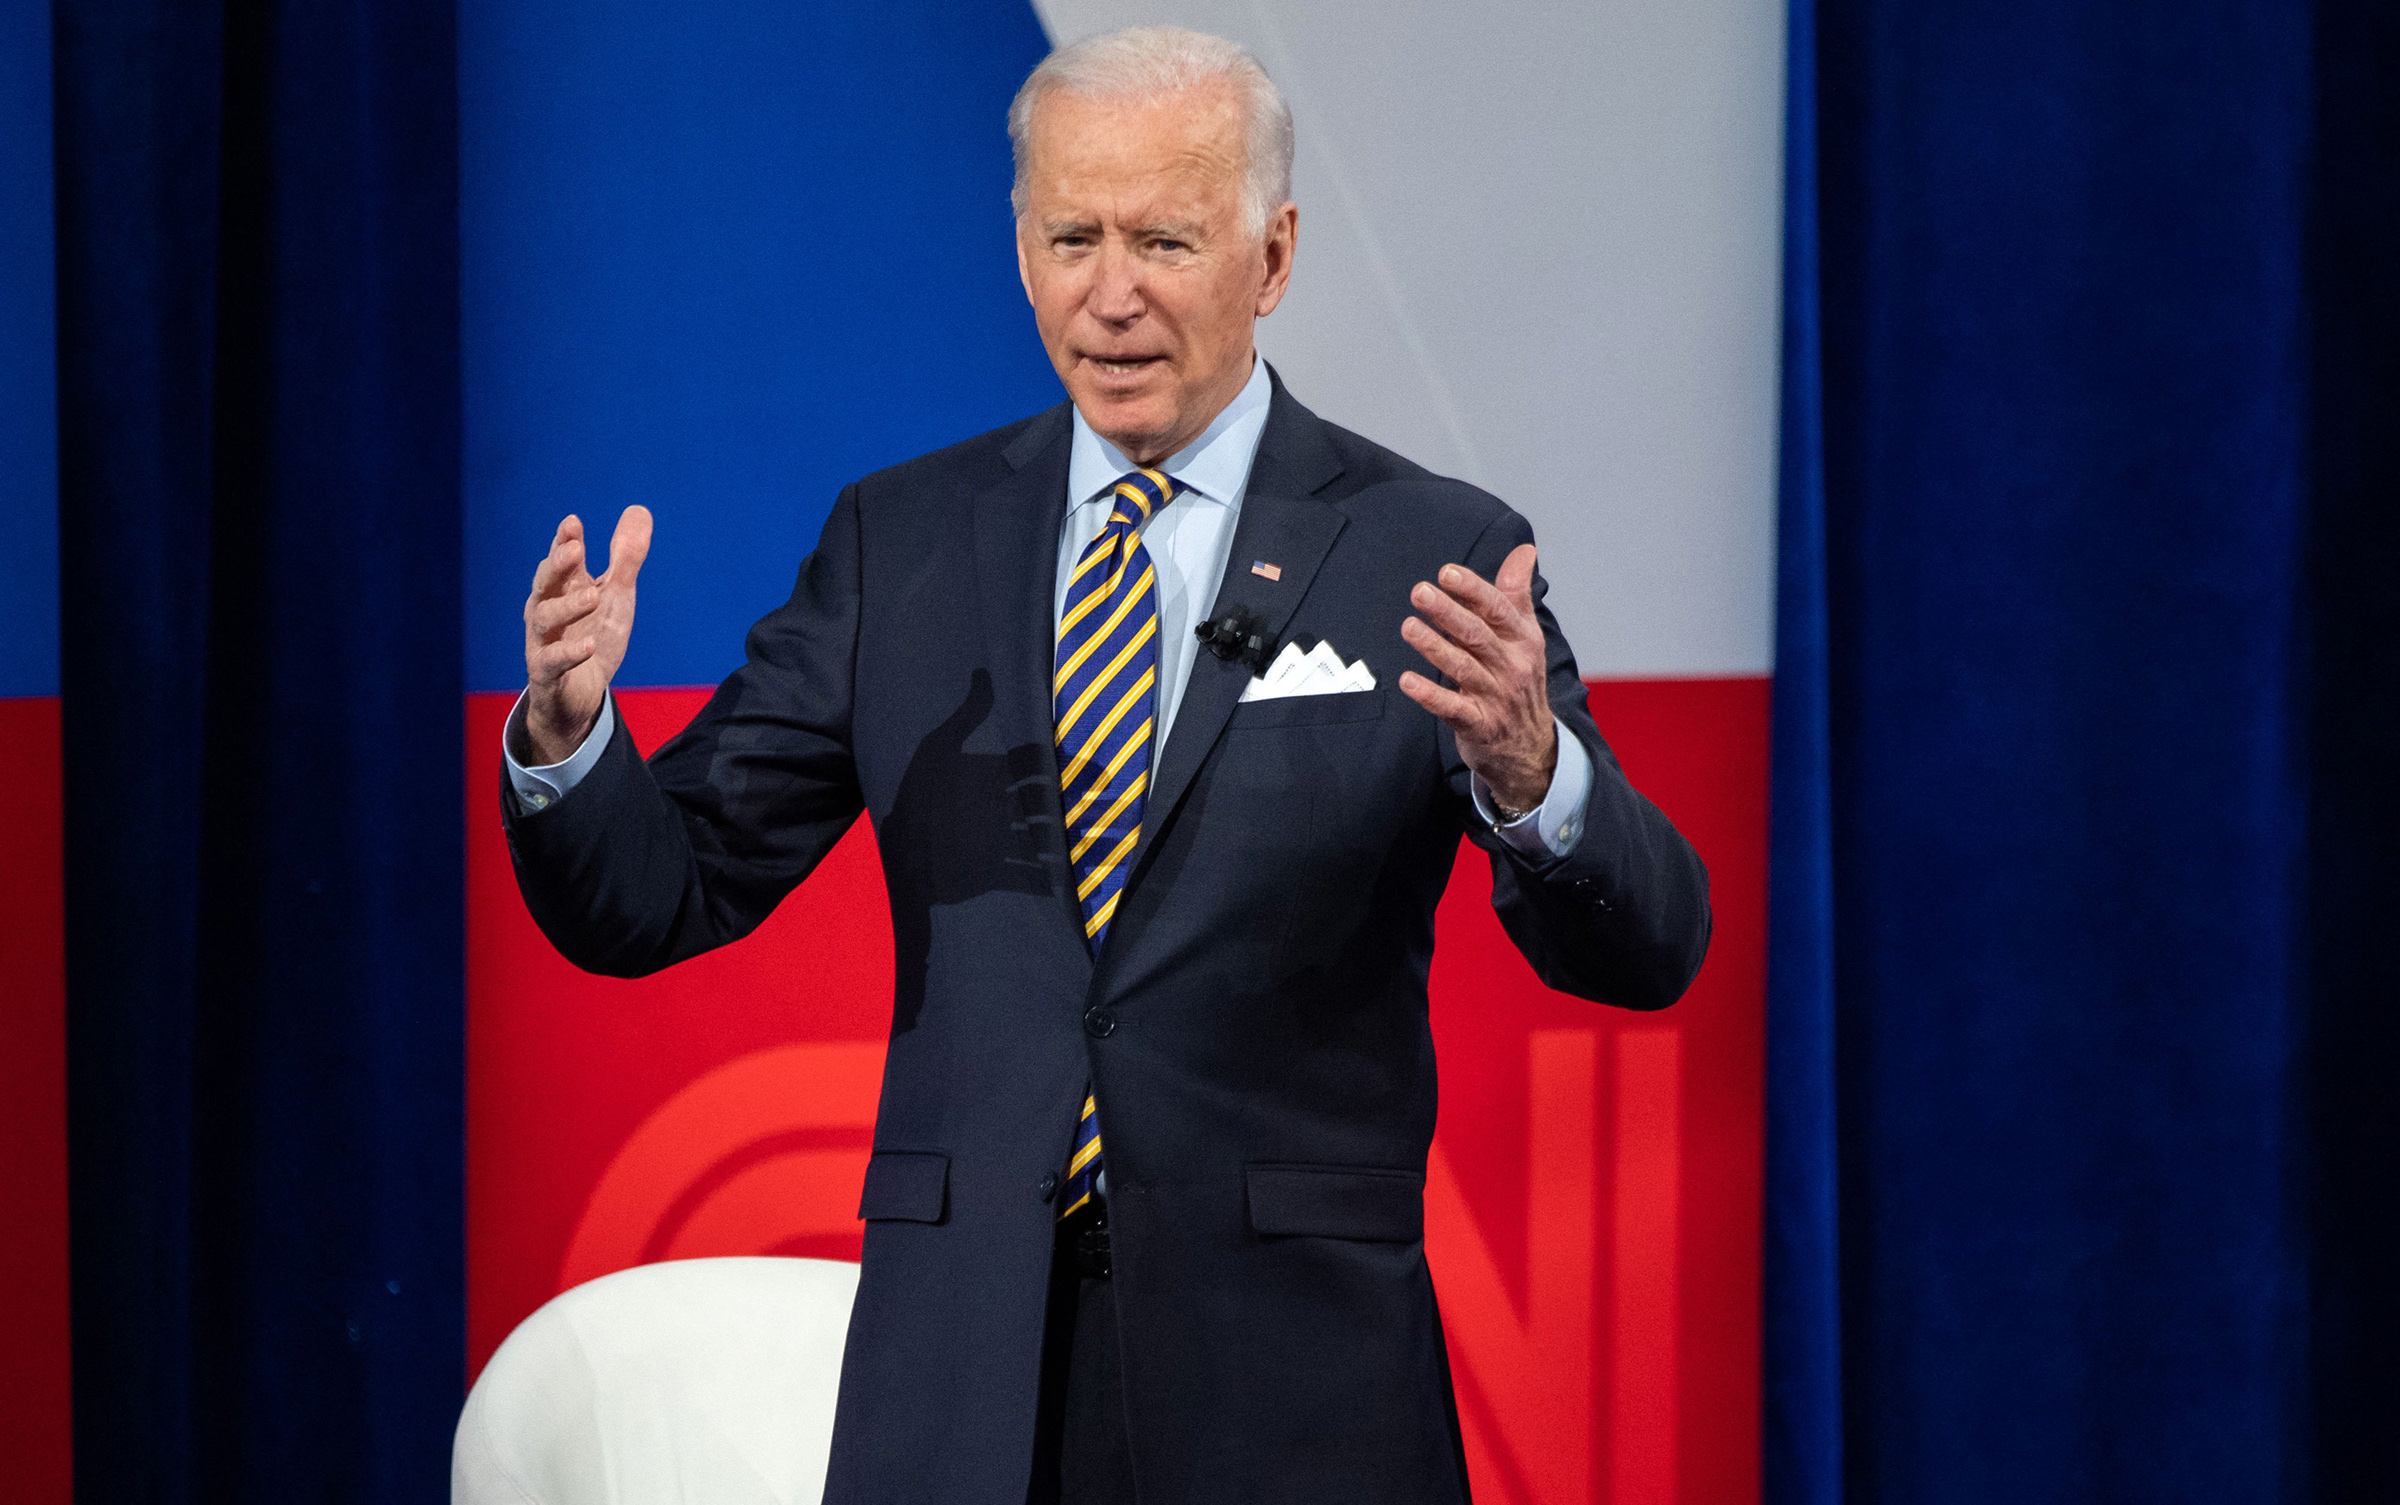 President Joe Biden participates in a CNN town hall at the Pabst Theater in Milwaukee, Wis., on Feb. 16, 2021. (Saul Loeb—AFP/Getty Images)